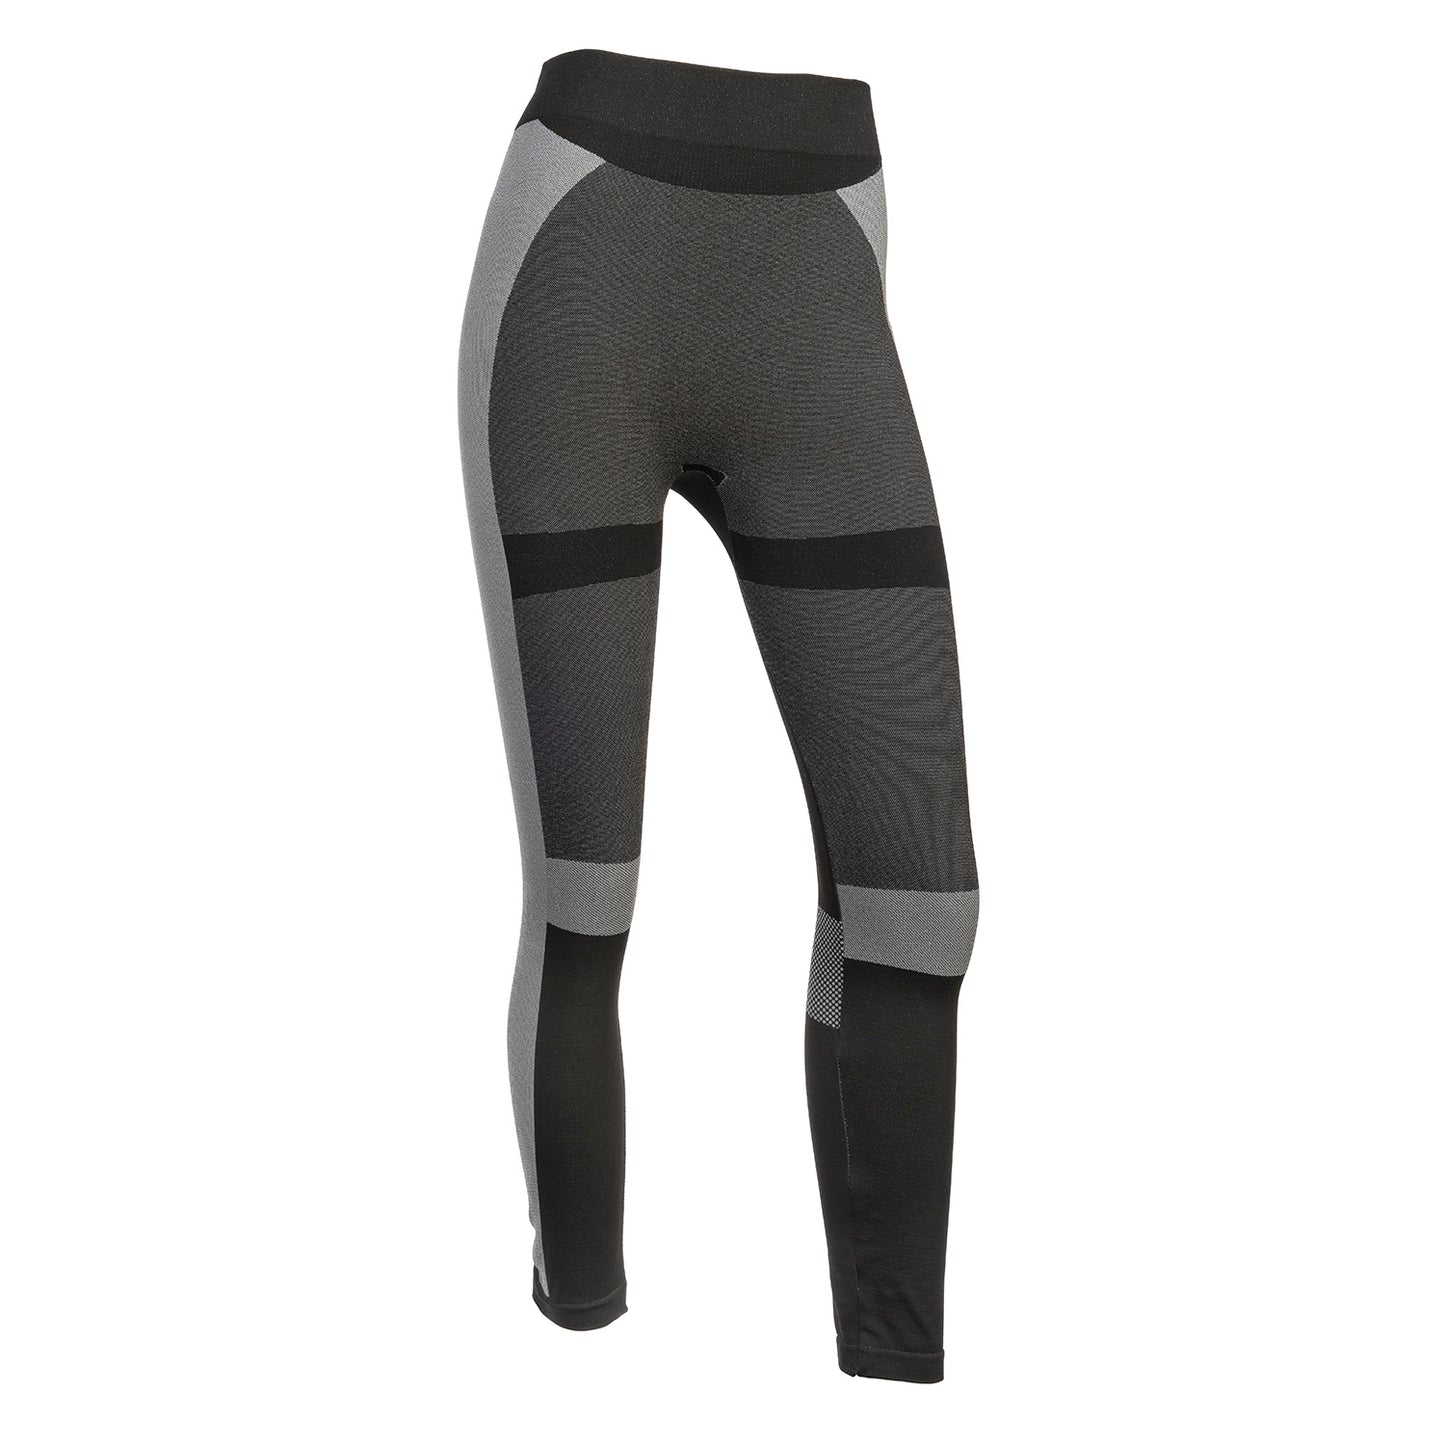 Athleisure High-Waisted Stretchy Workout Legging